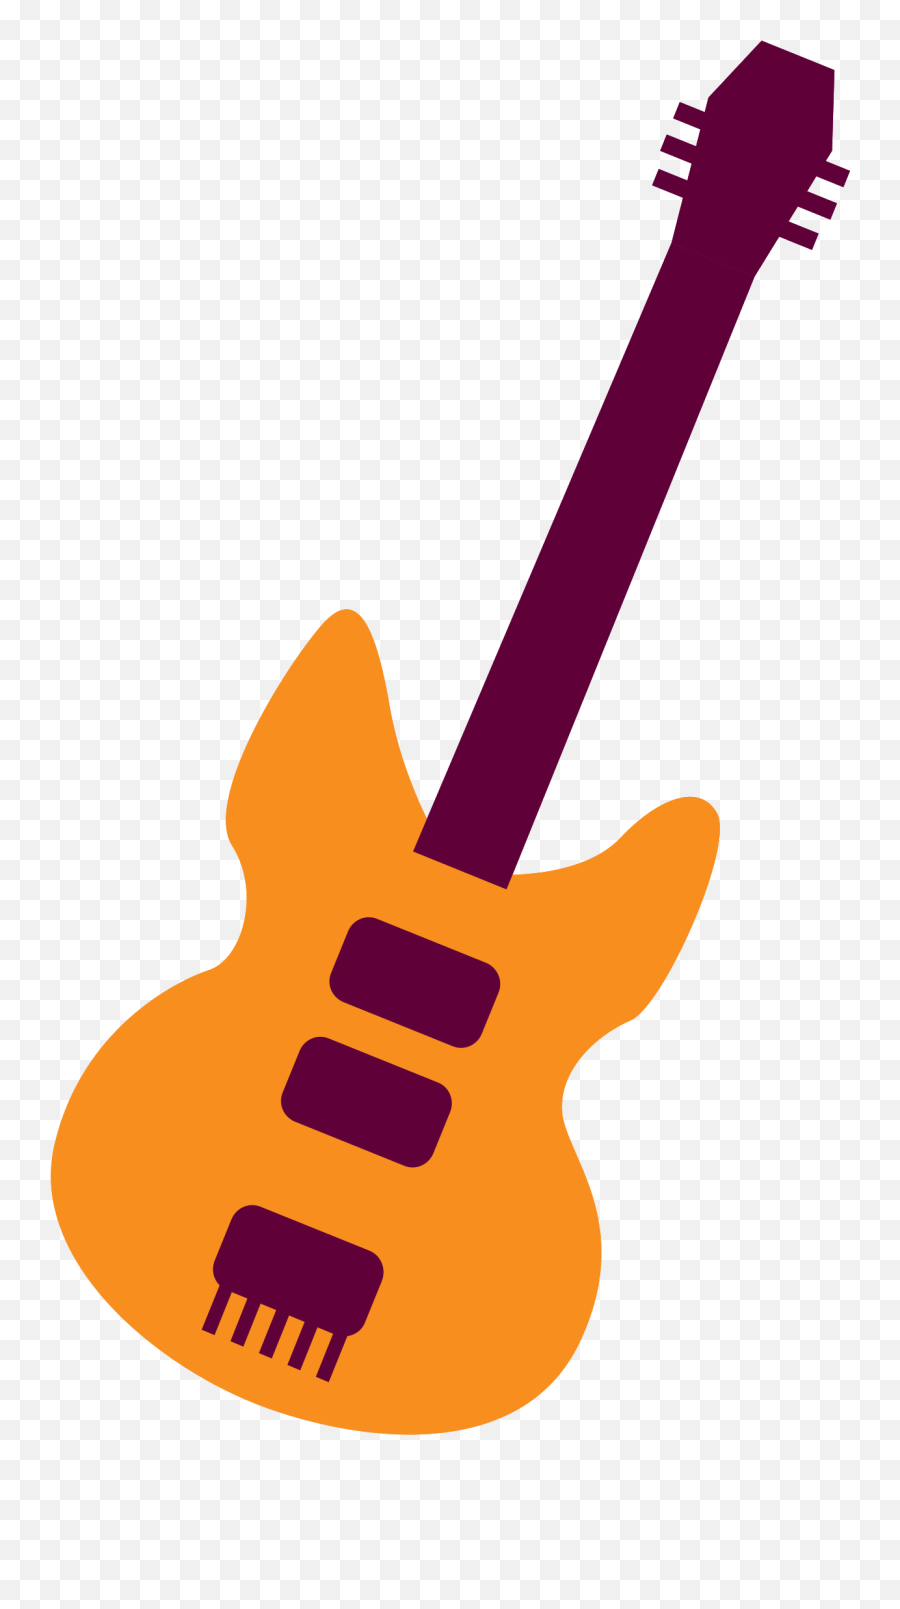 Free Music Instrument Guitar Png With Transparent Background - Girly Emoji,Guitar Png